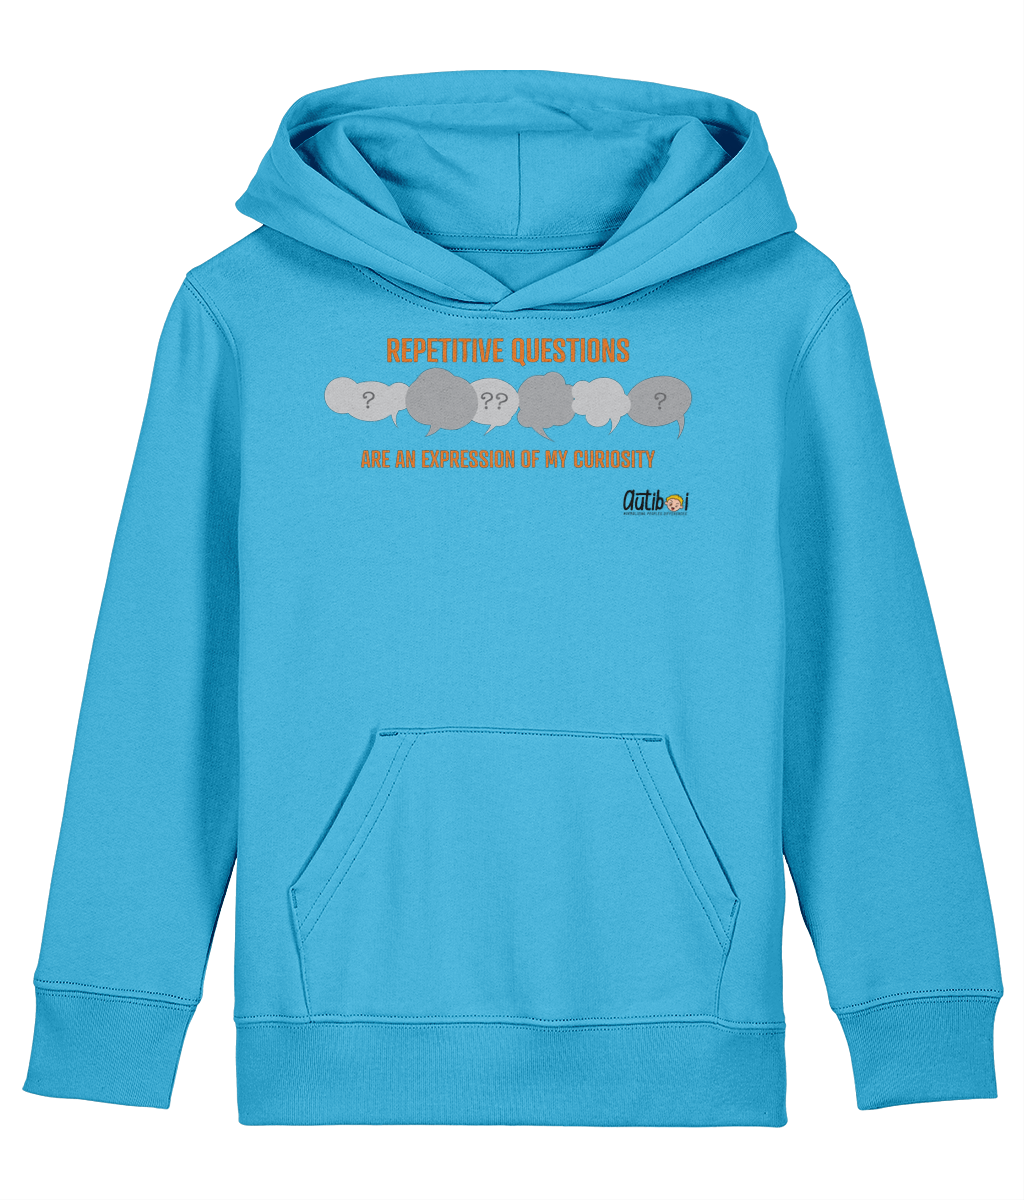 Repetitive Questions - Kids Hoodie